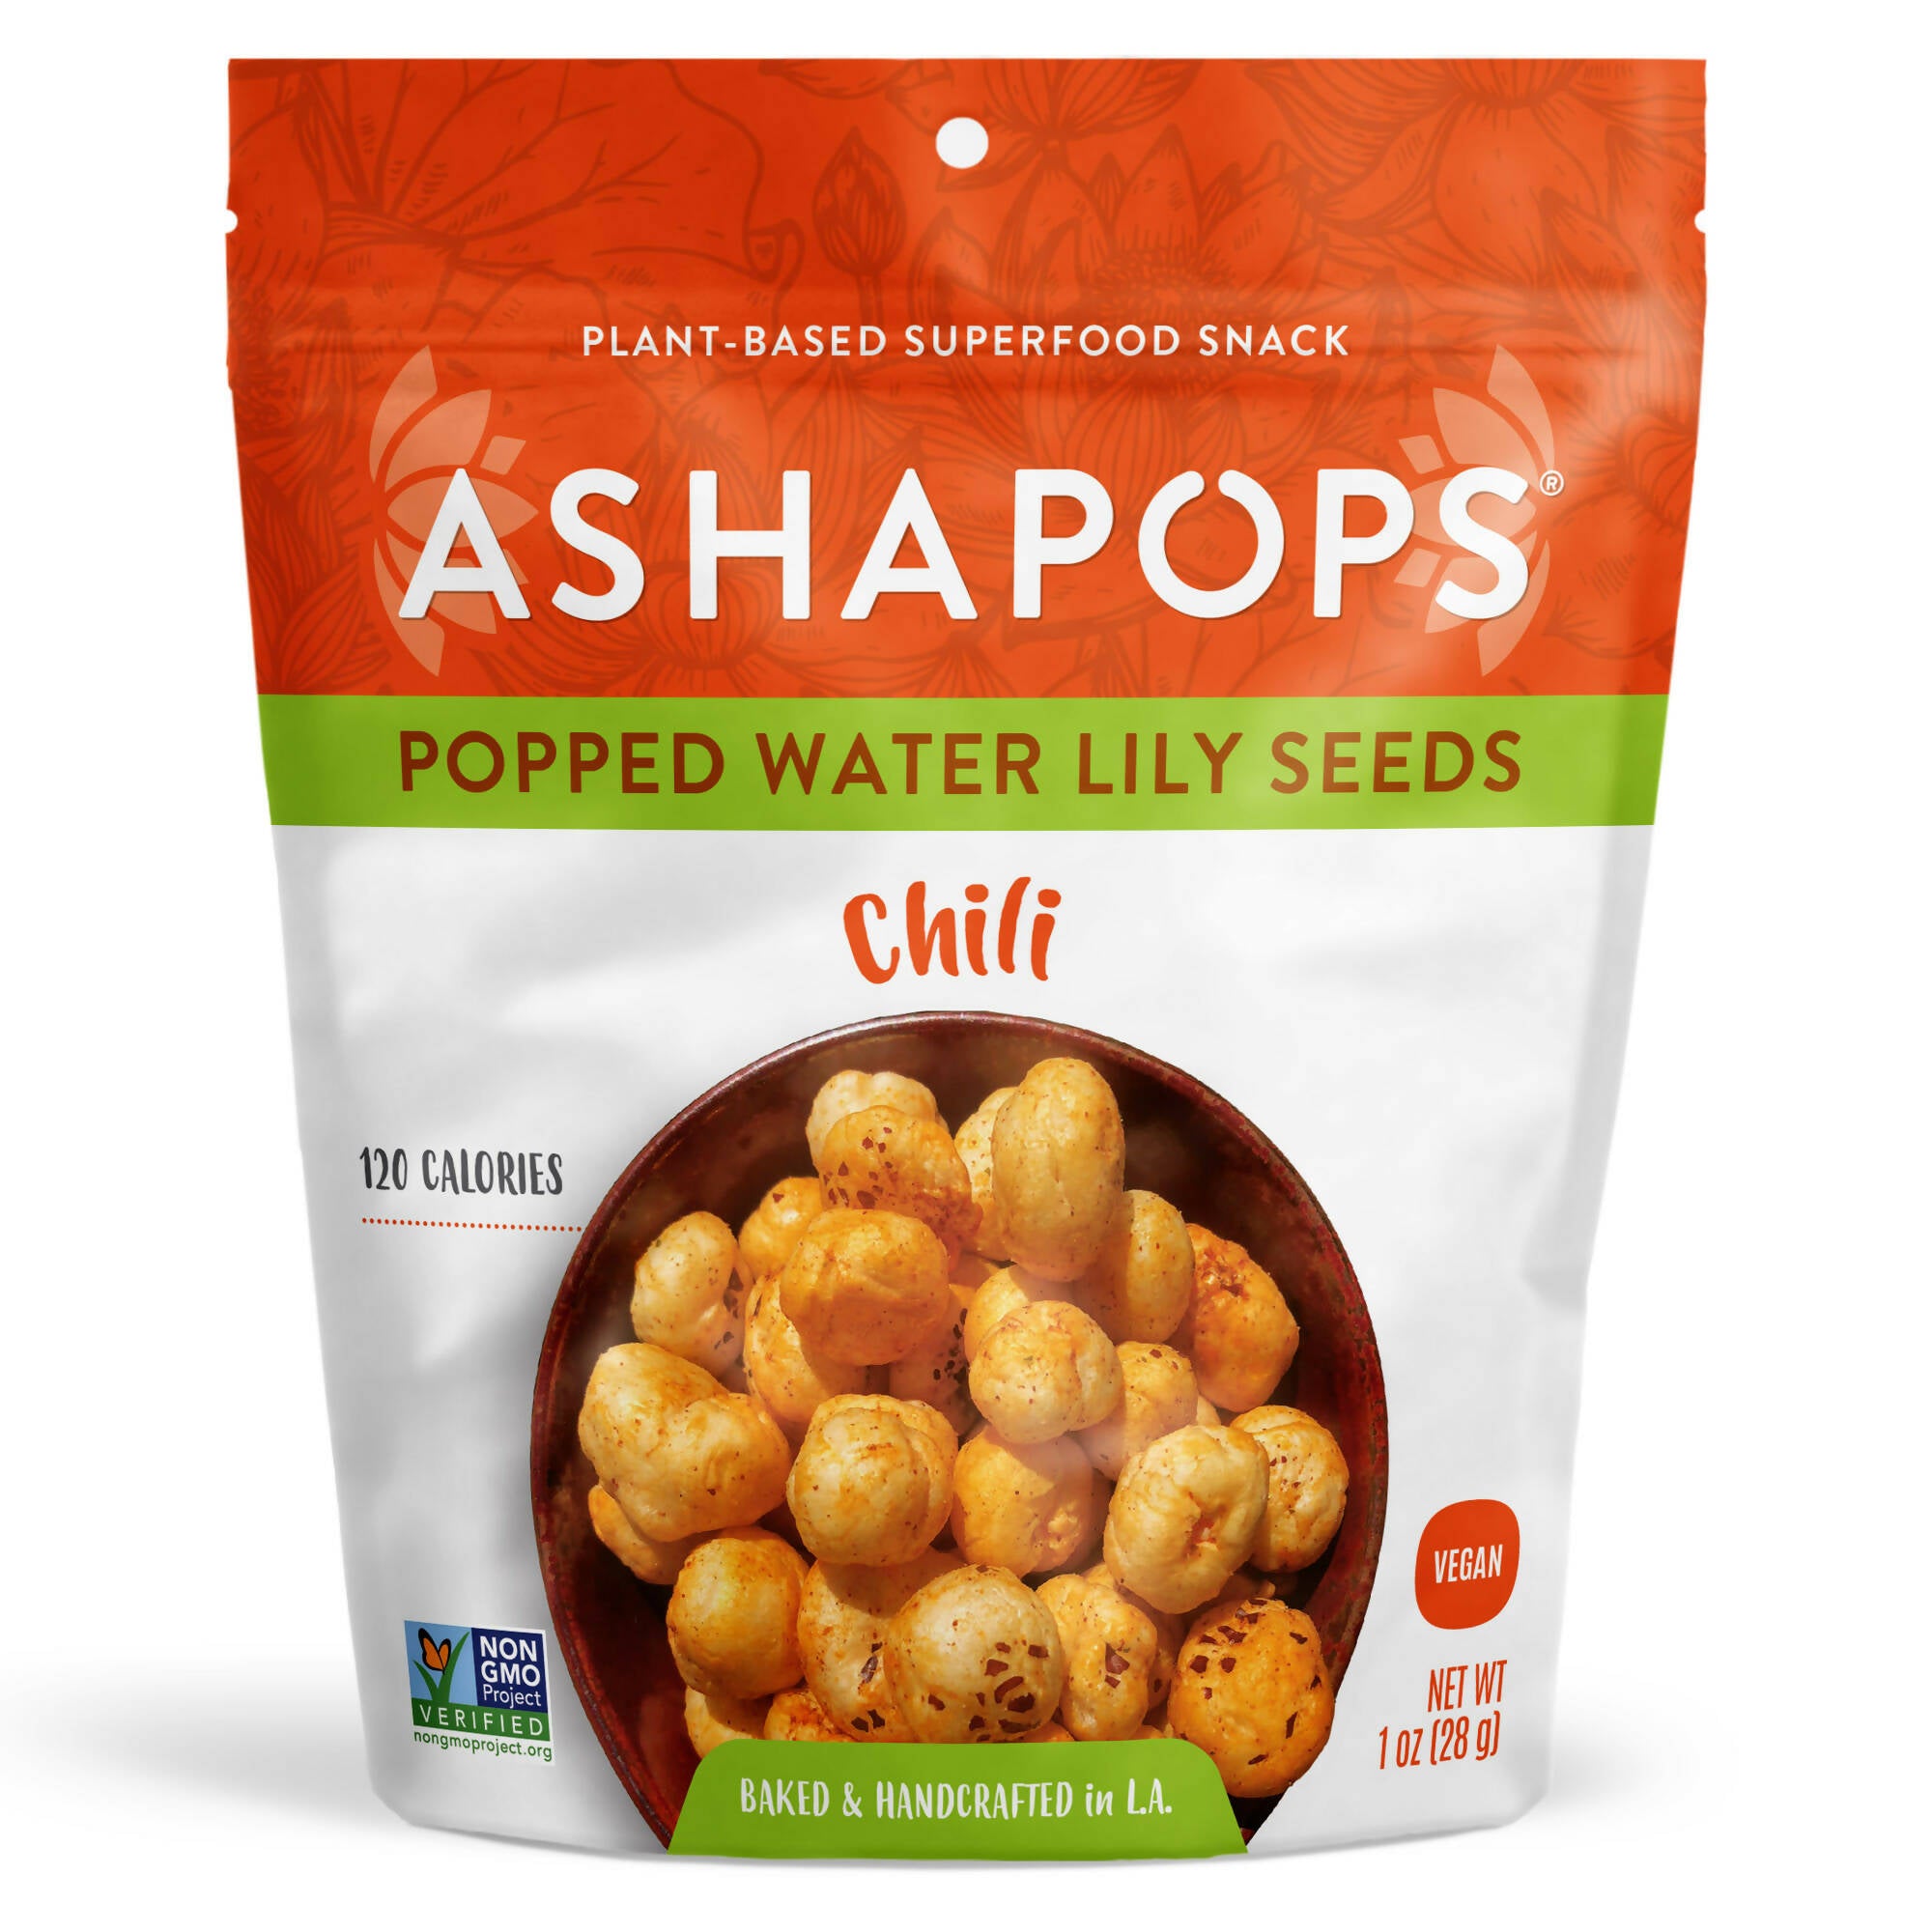 AshaPops Popped Water Lily Seeds Chili 1 oz (4 pack)